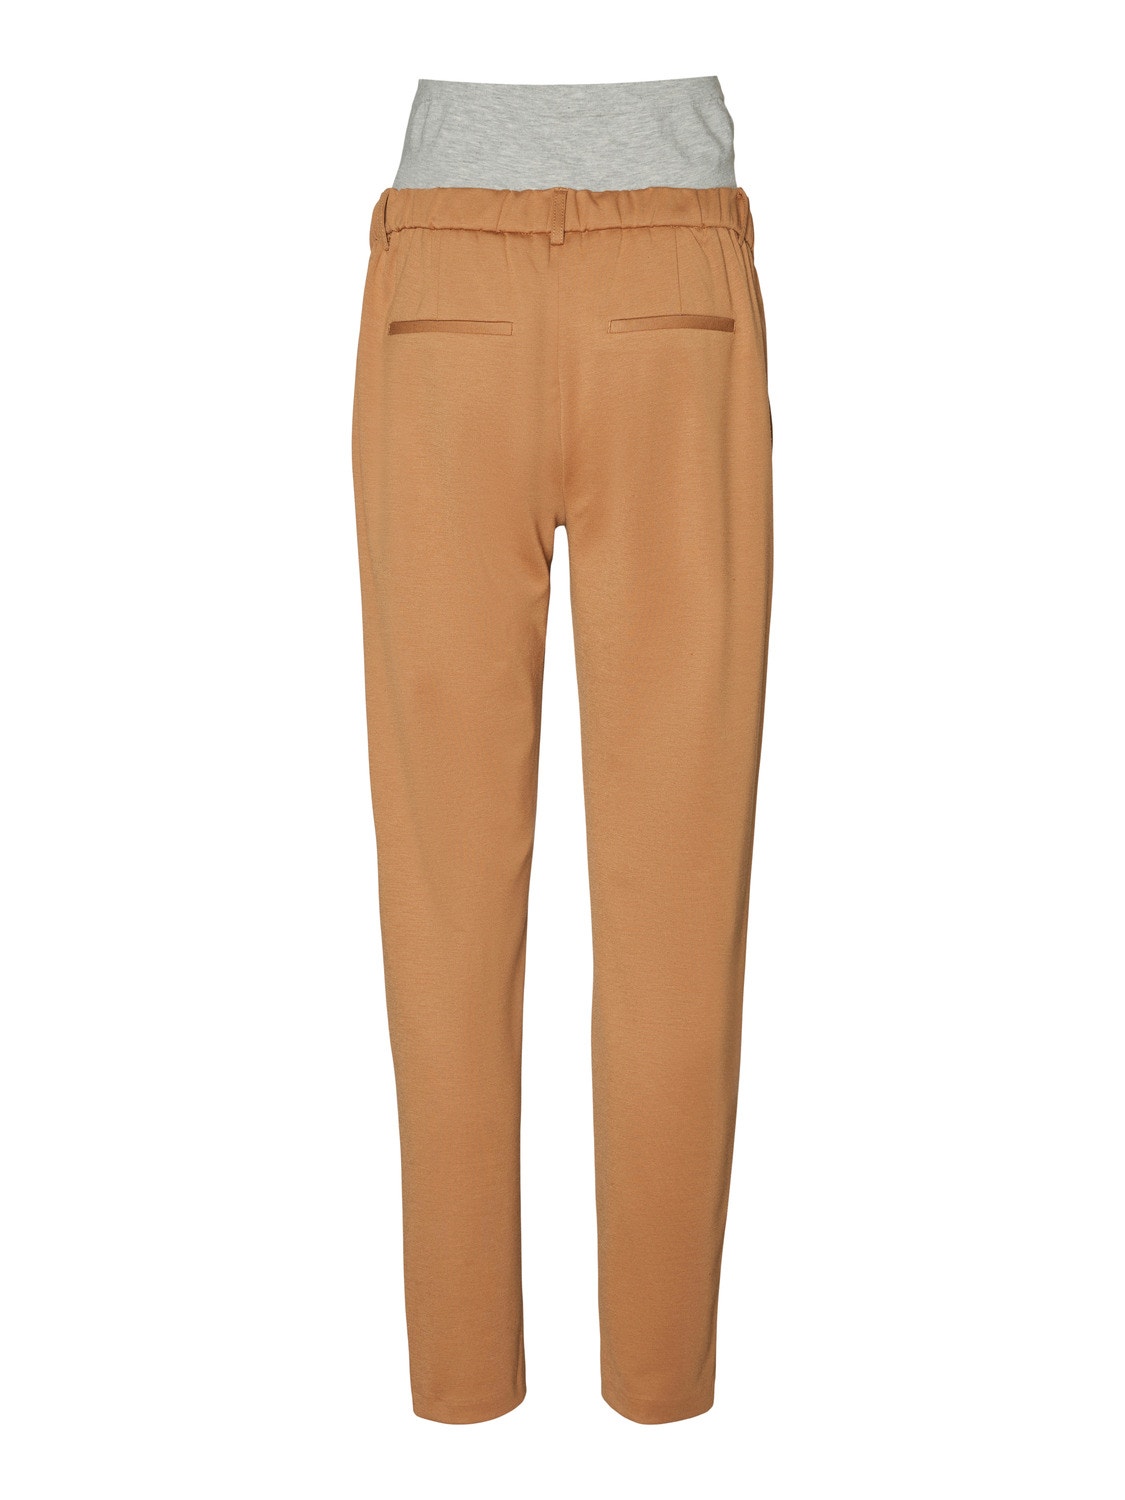 MAMA.LICIOUS Tapered Fit Trousers -Tobacco Brown - 20015718